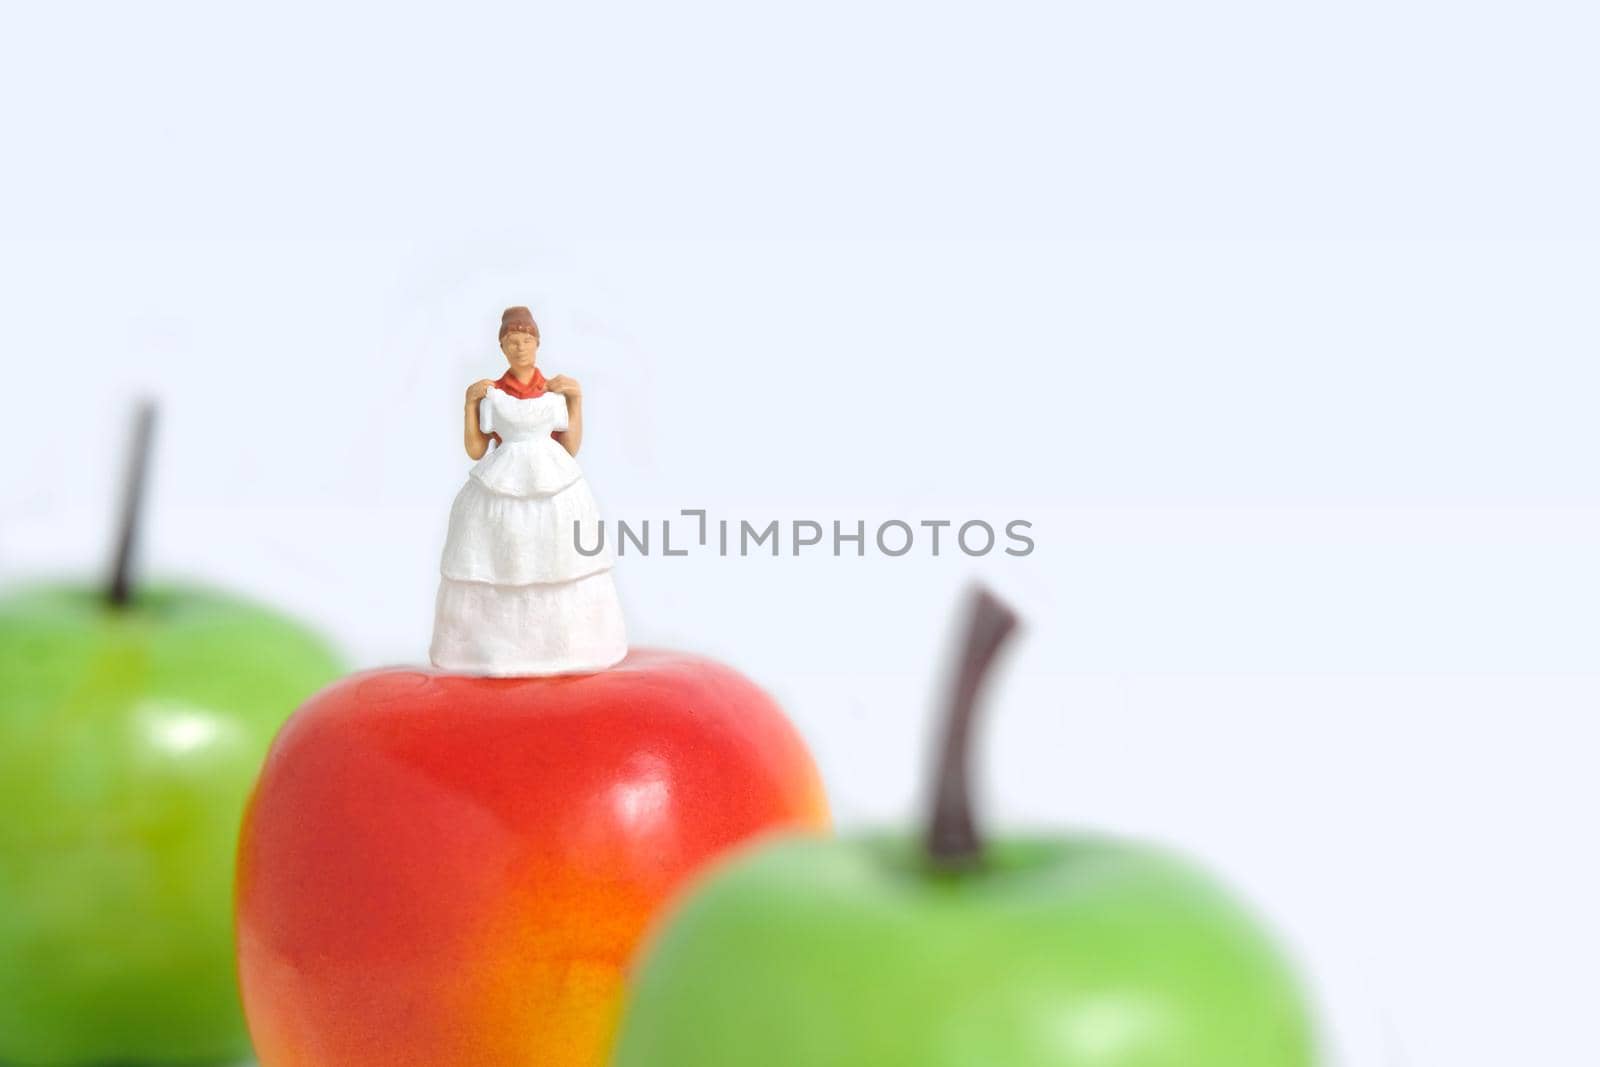 Diet plan before wedding or marriage day concept. Woman standing above apple with trying wedding dress. Miniature people, toys photography.